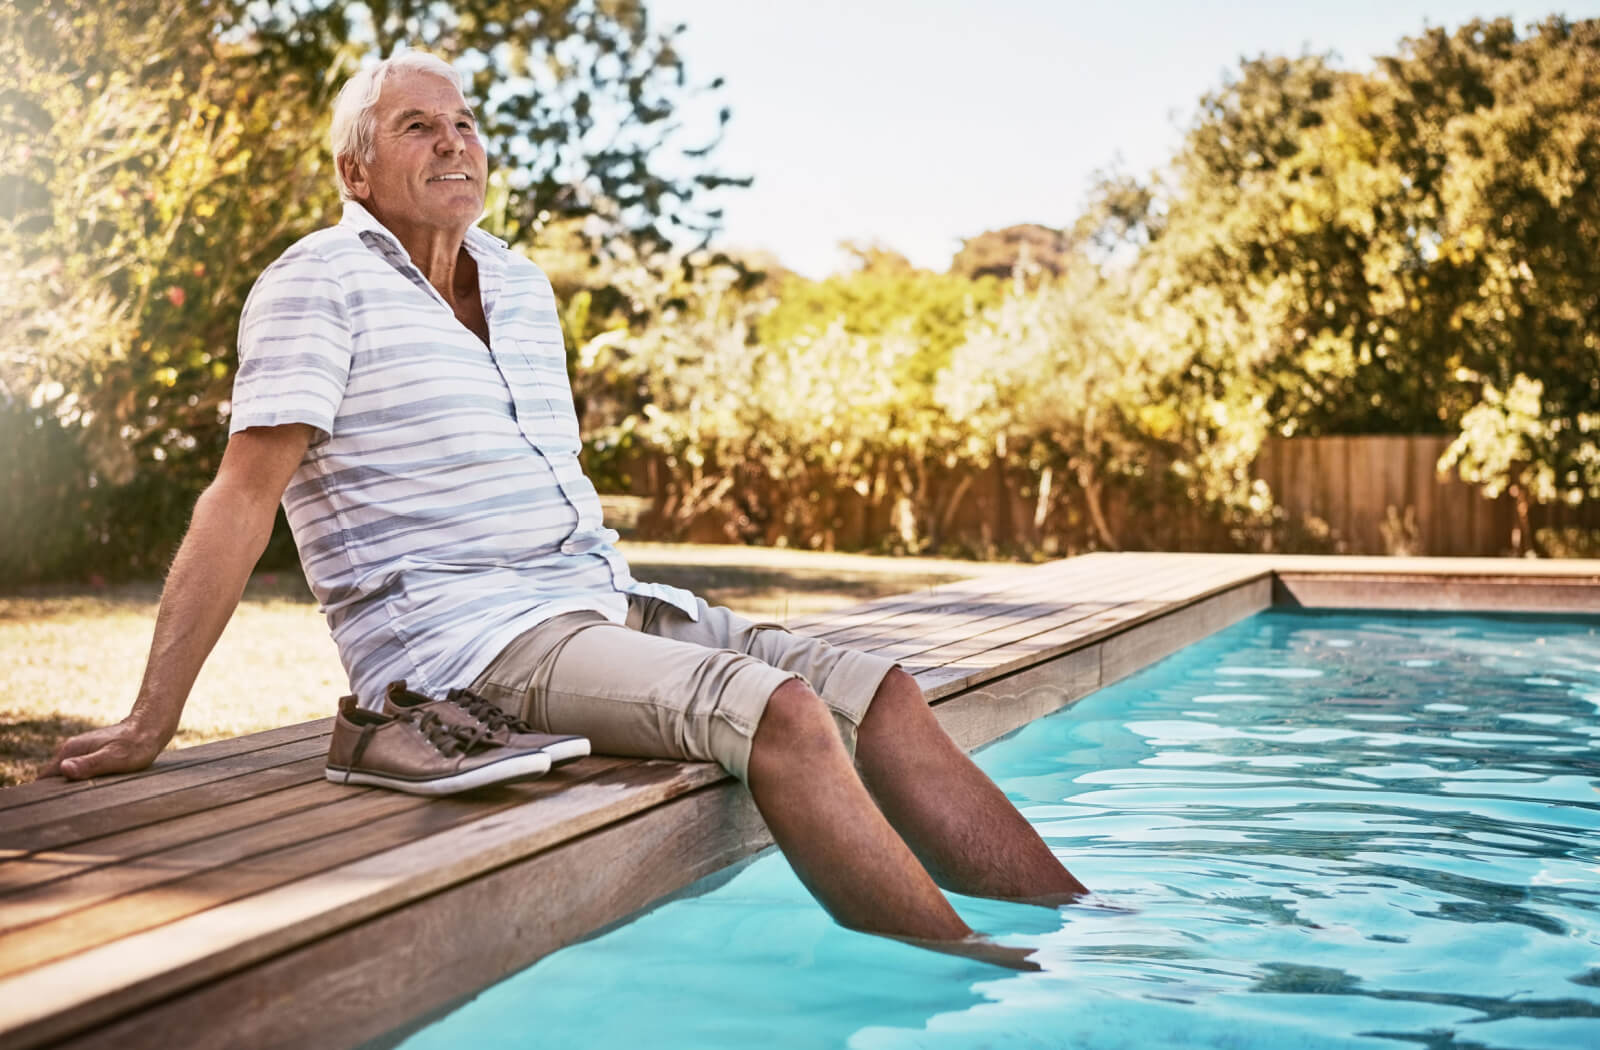 An older adult man resting by the poolside and dipping his feet in the pool.